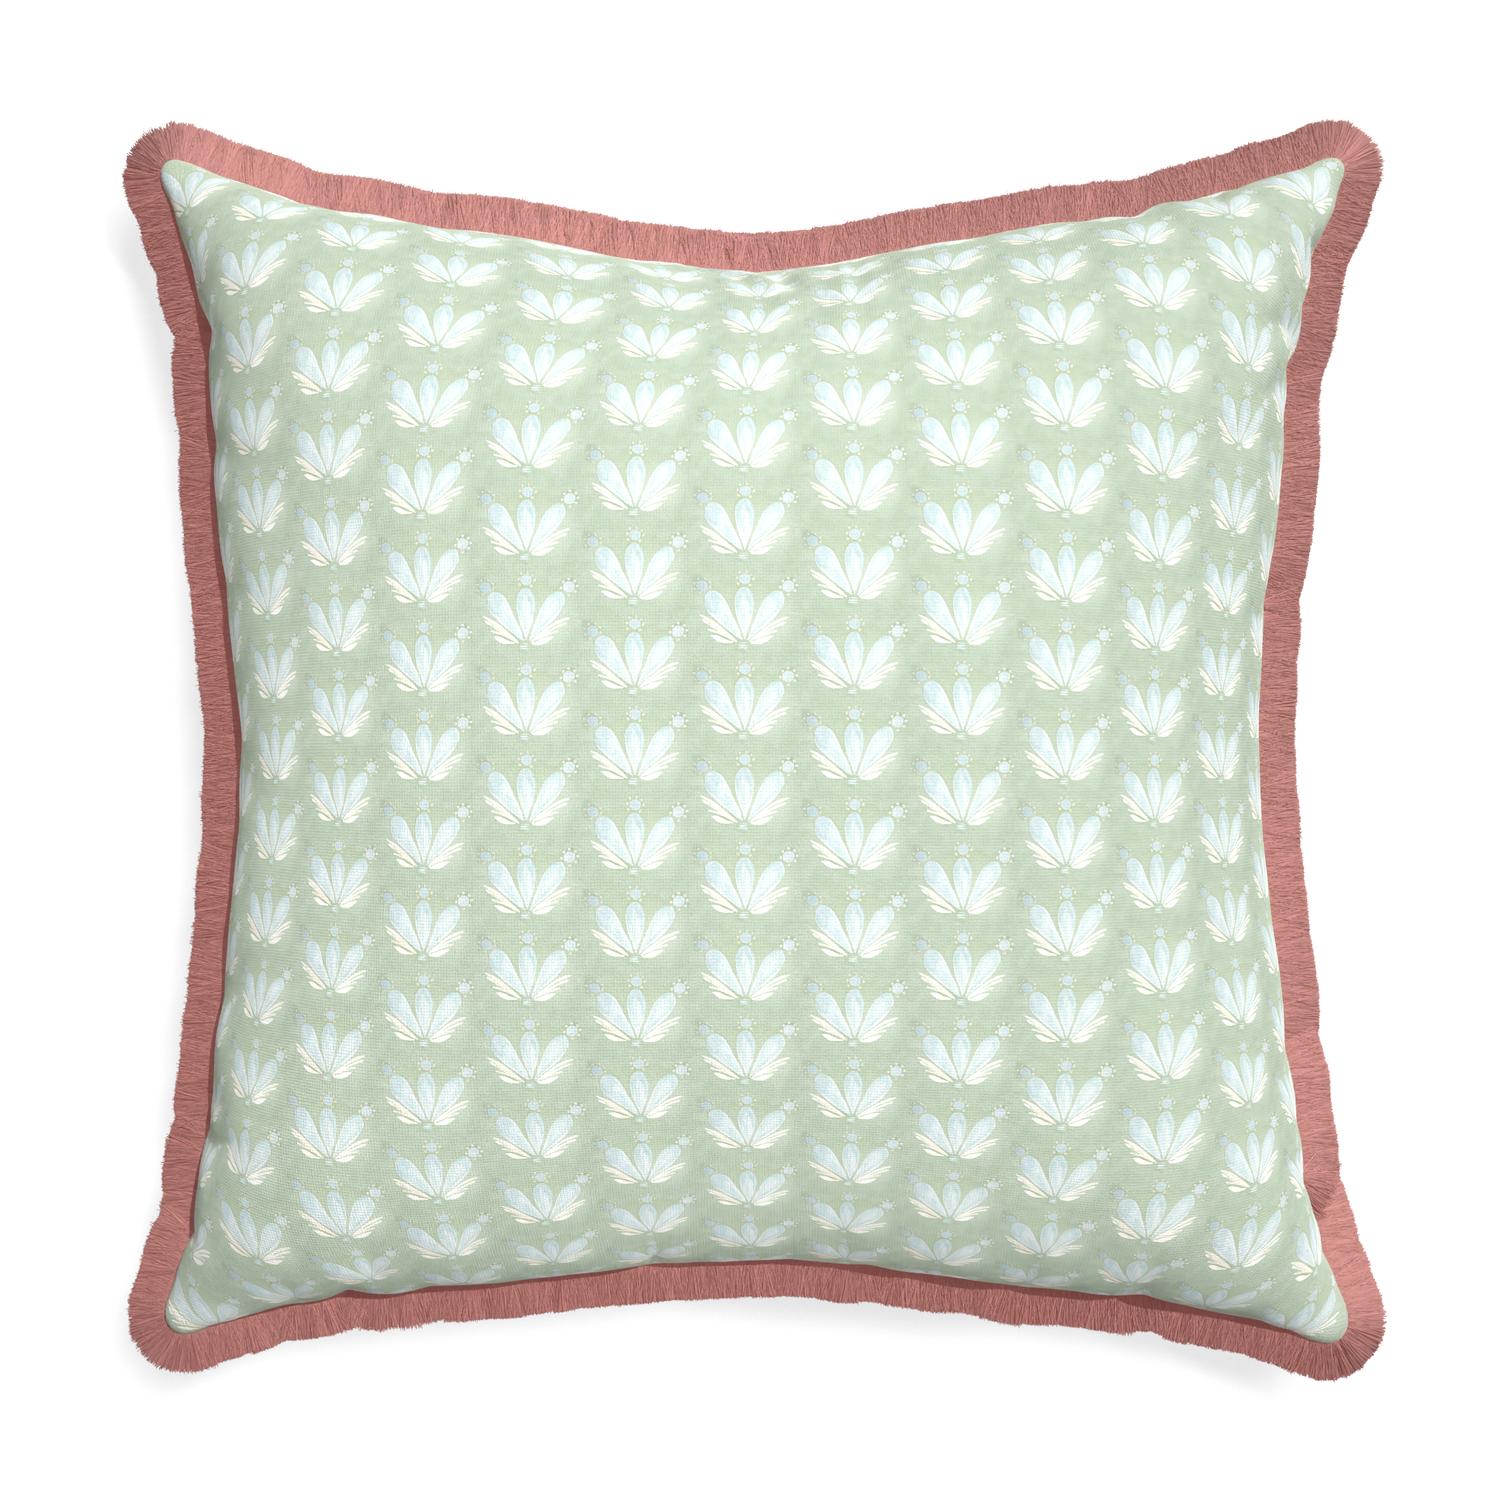 Euro-sham serena sea salt custom blue & green floral drop repeatpillow with d fringe on white background